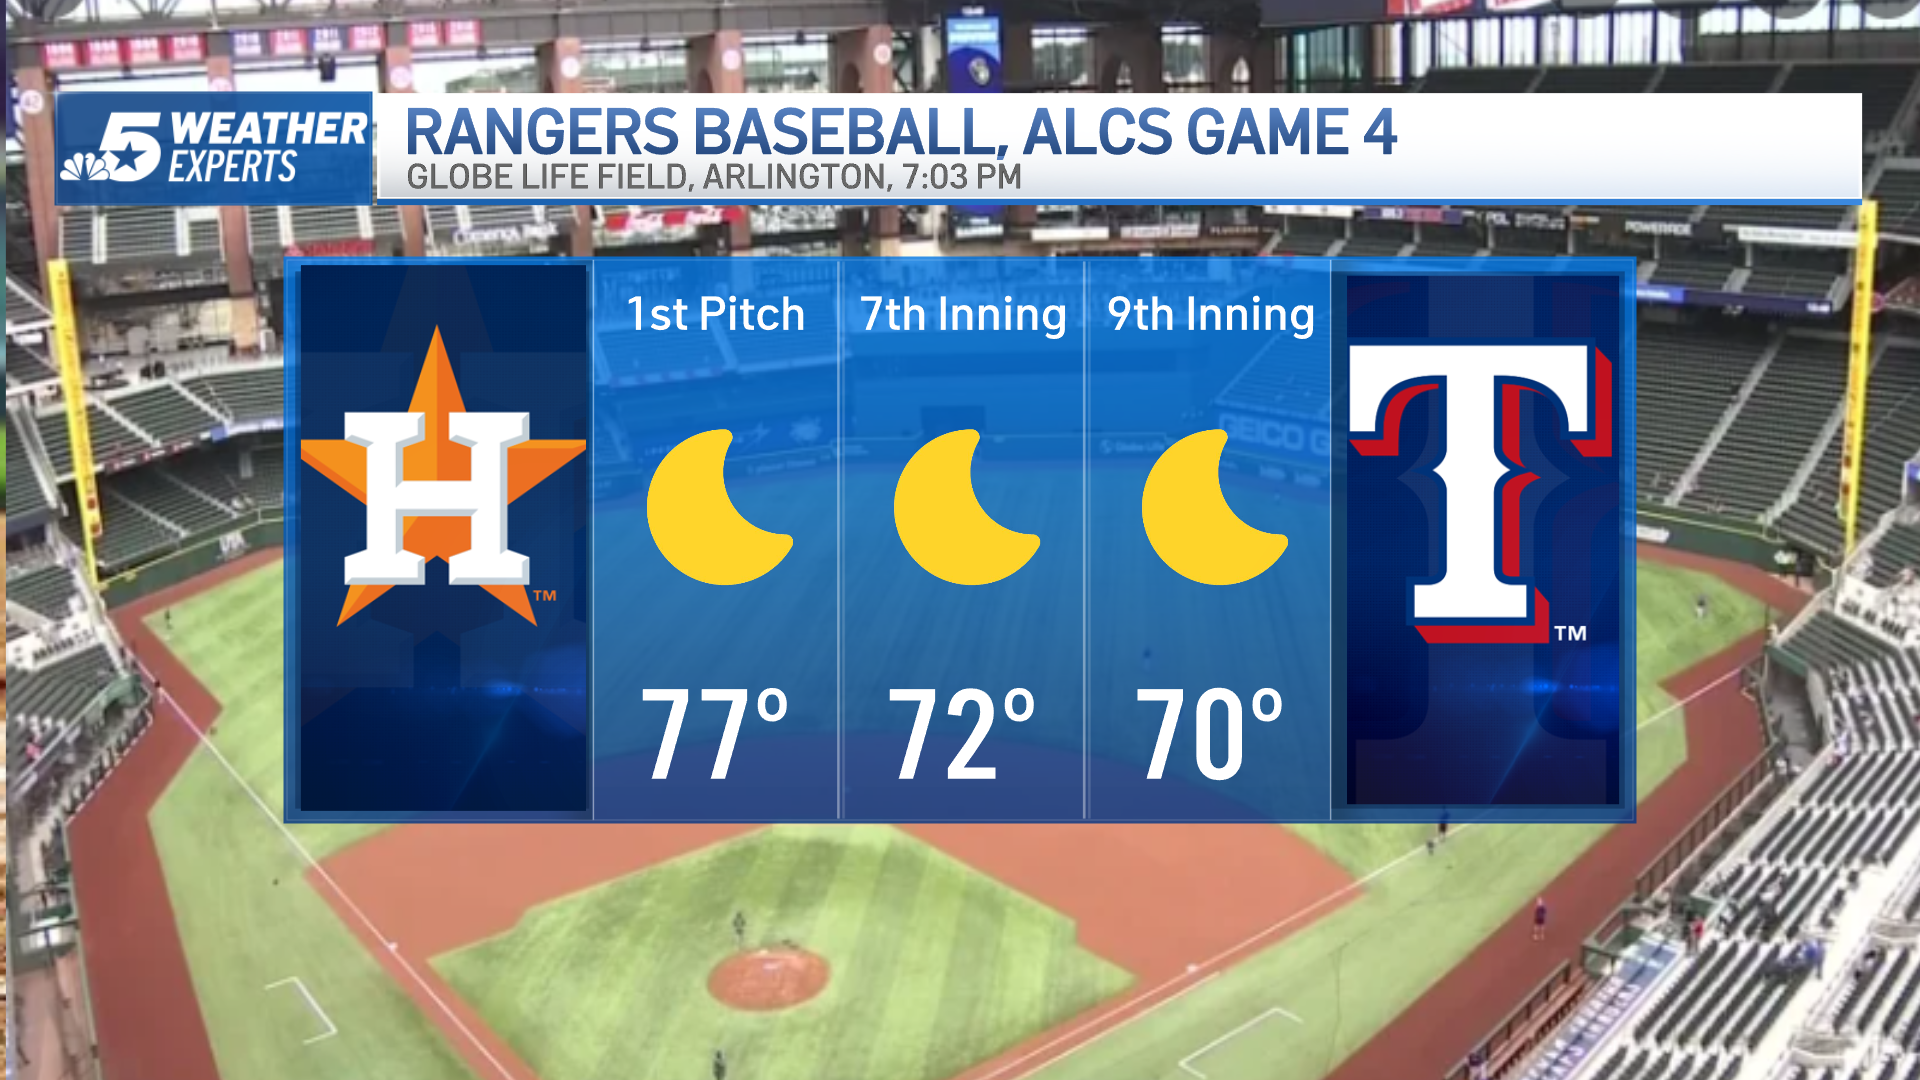 Rangers vs. Astros ALCS Game 4 Probable Starting Pitching - October 19